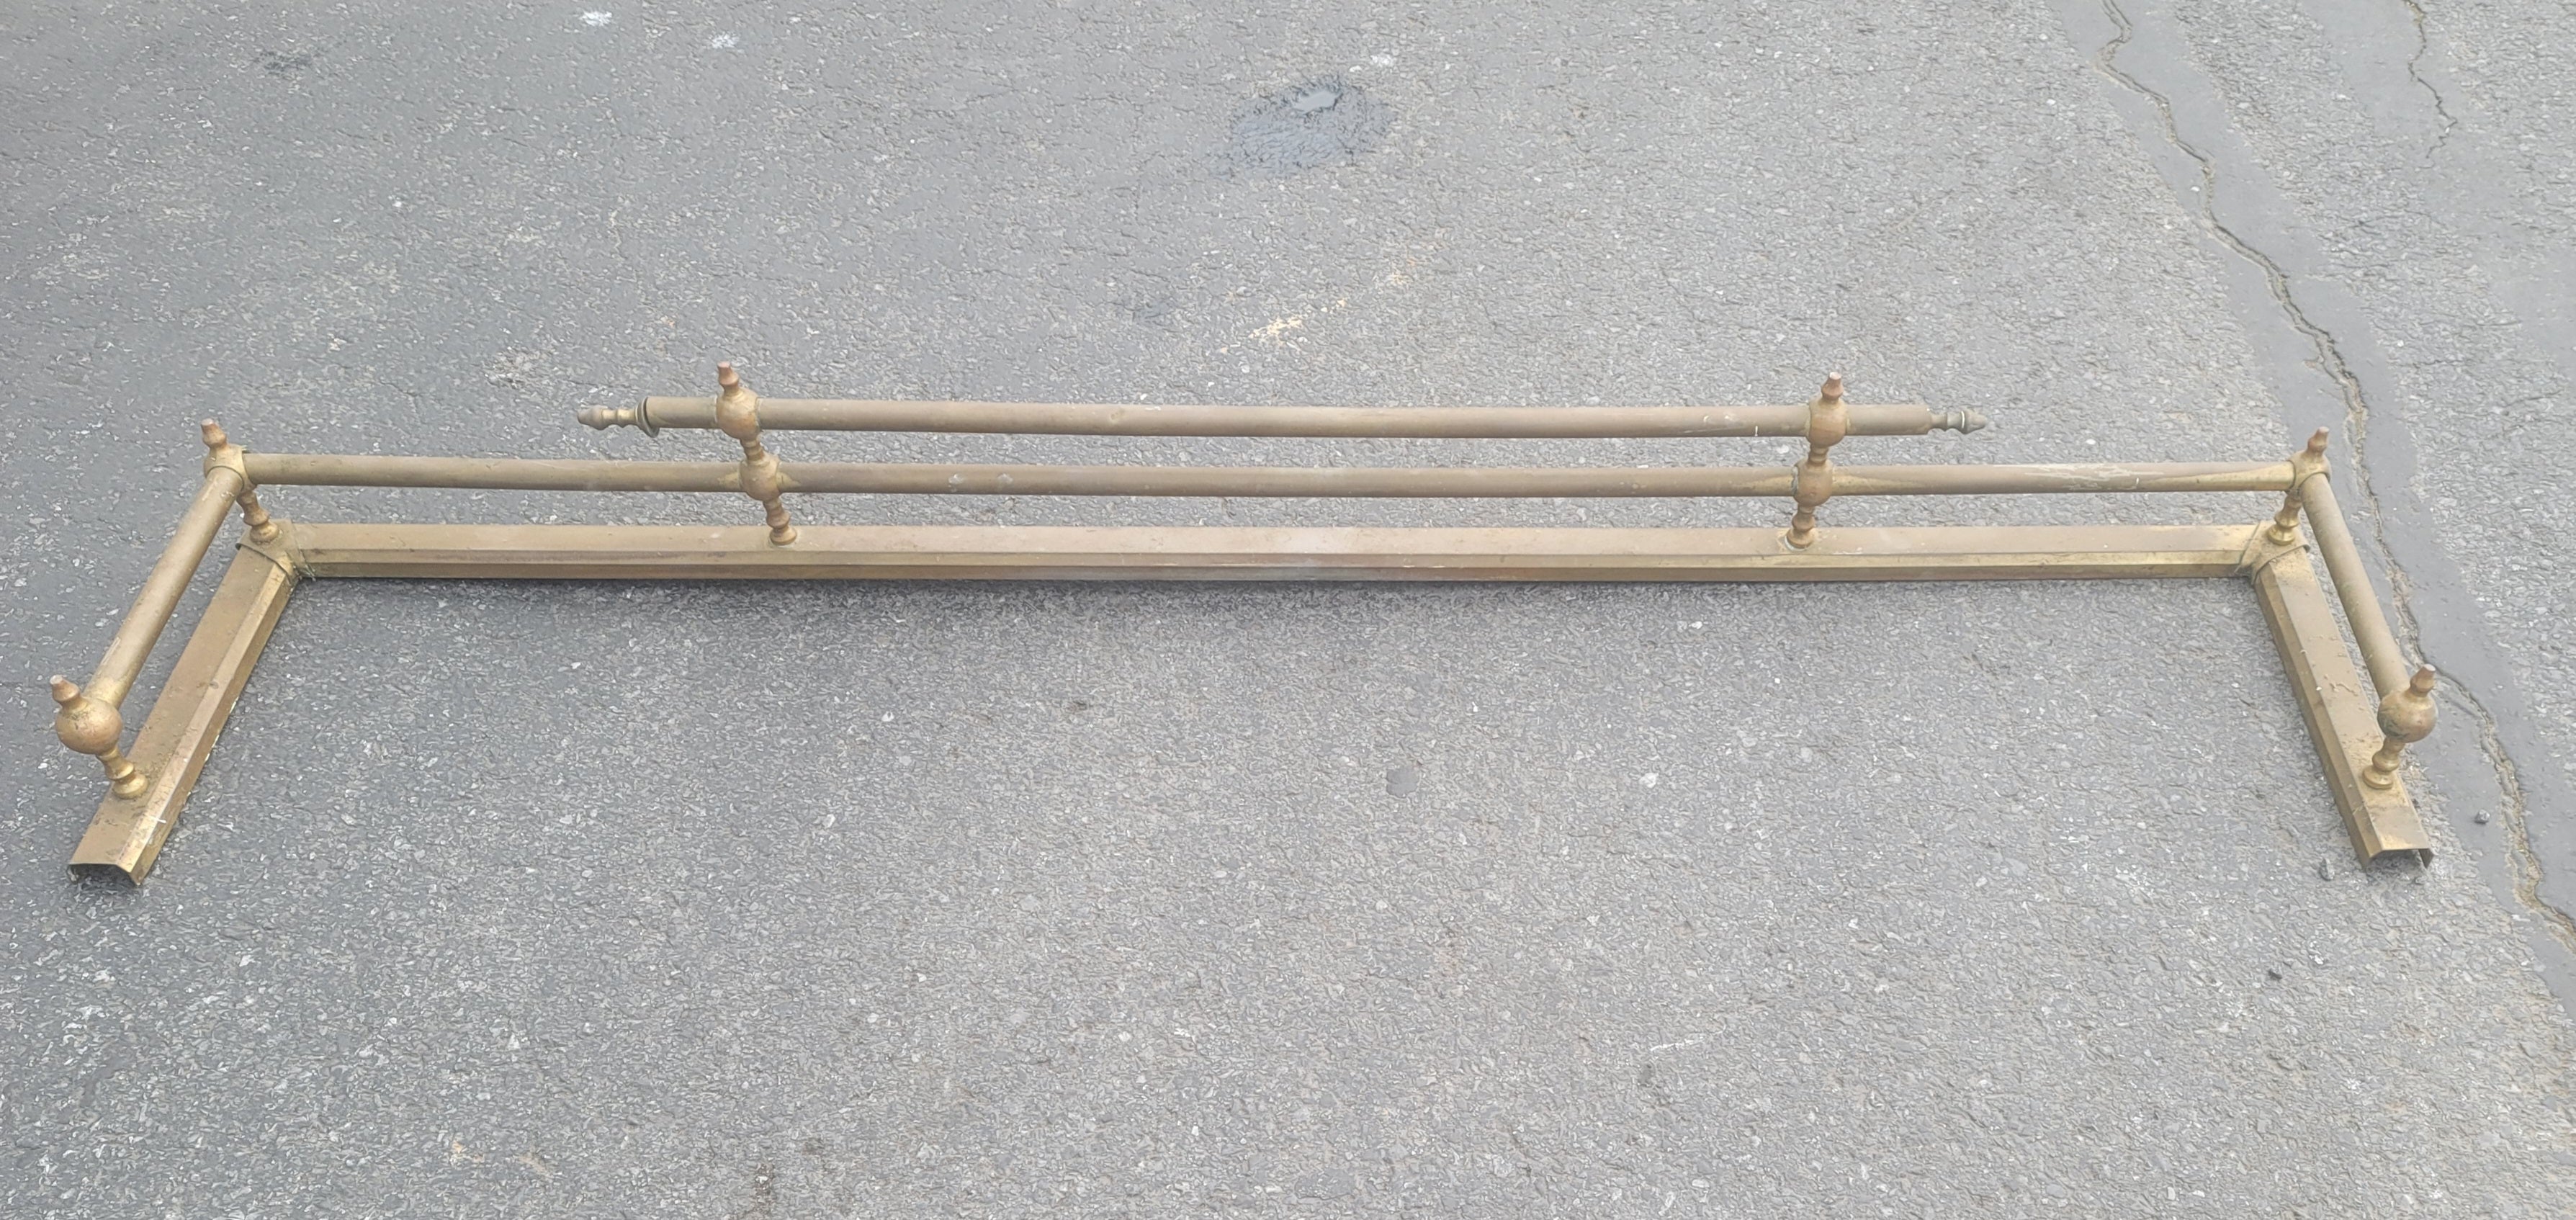 19th Century Brass Fireplace Fender  In Good Condition For Sale In Germantown, MD